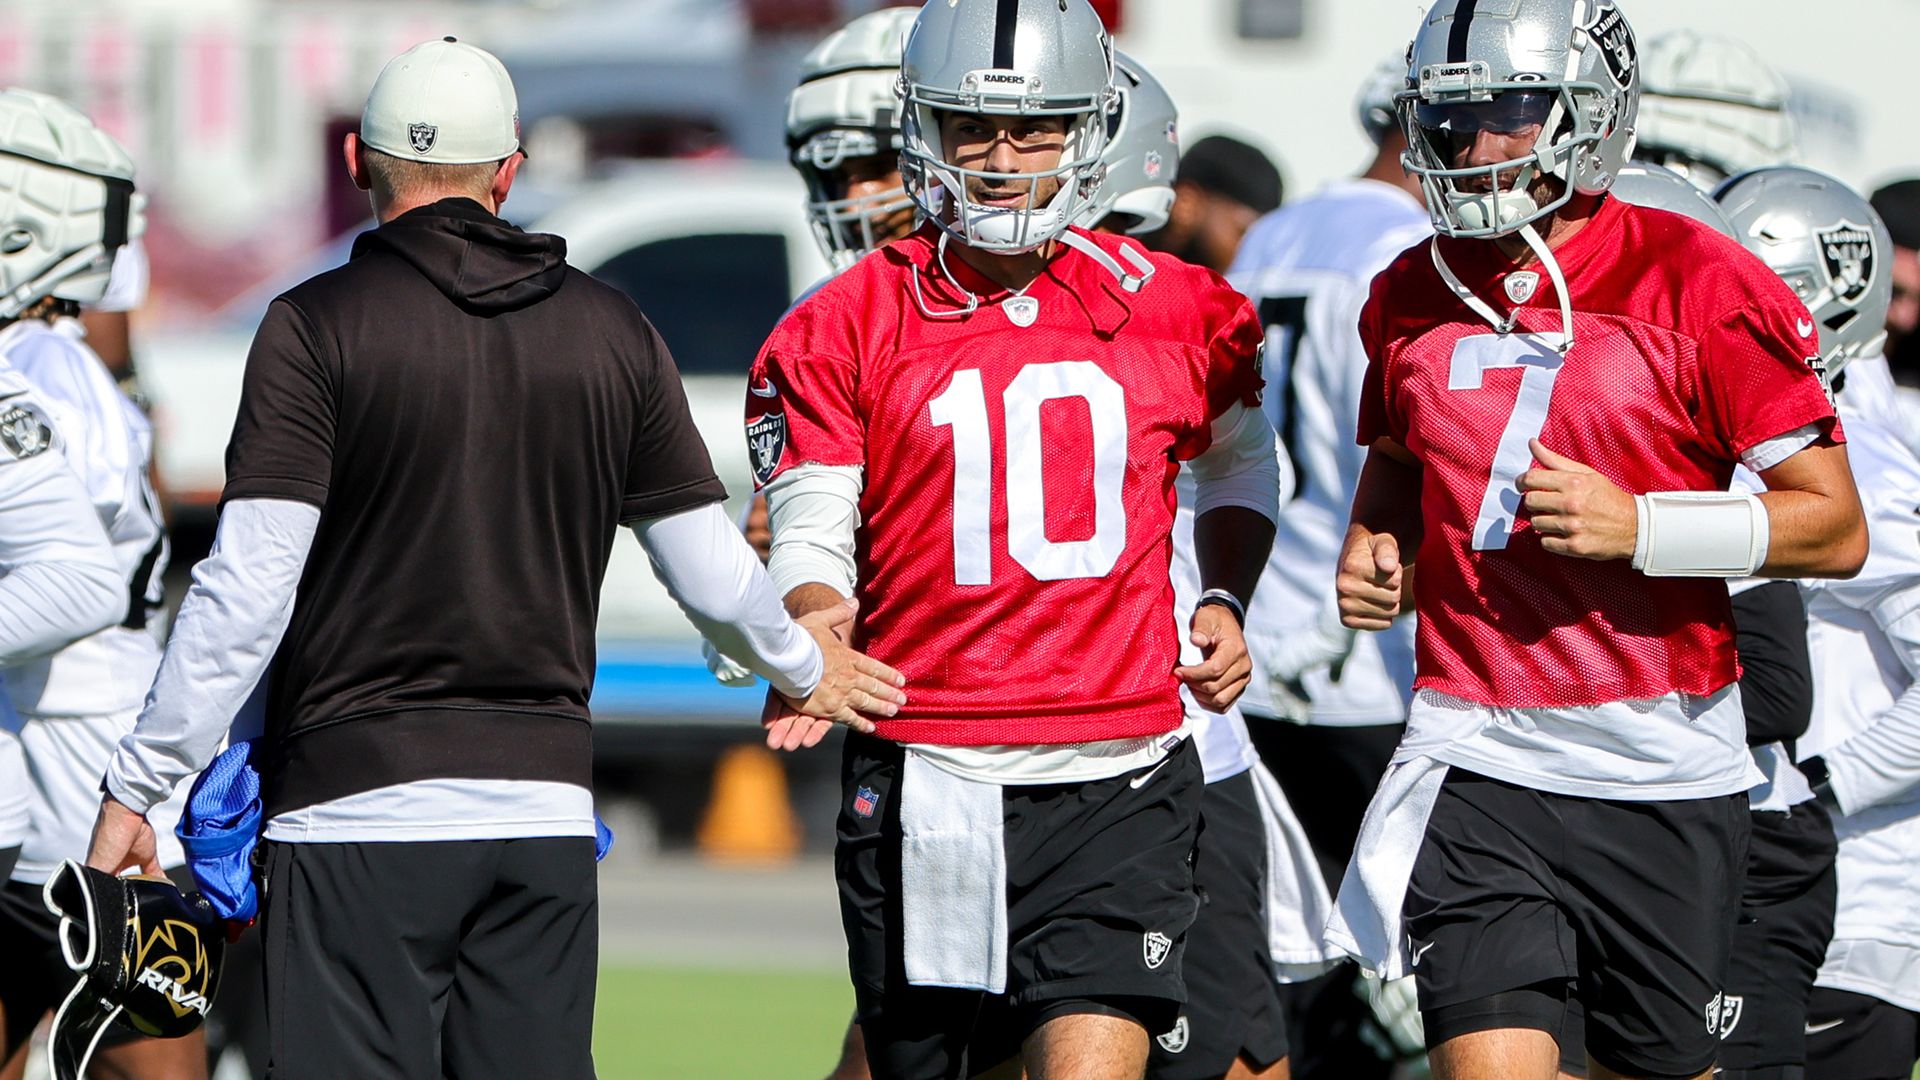 Raiders vs. 49ers preseason 3 things to watch for during joint practices.